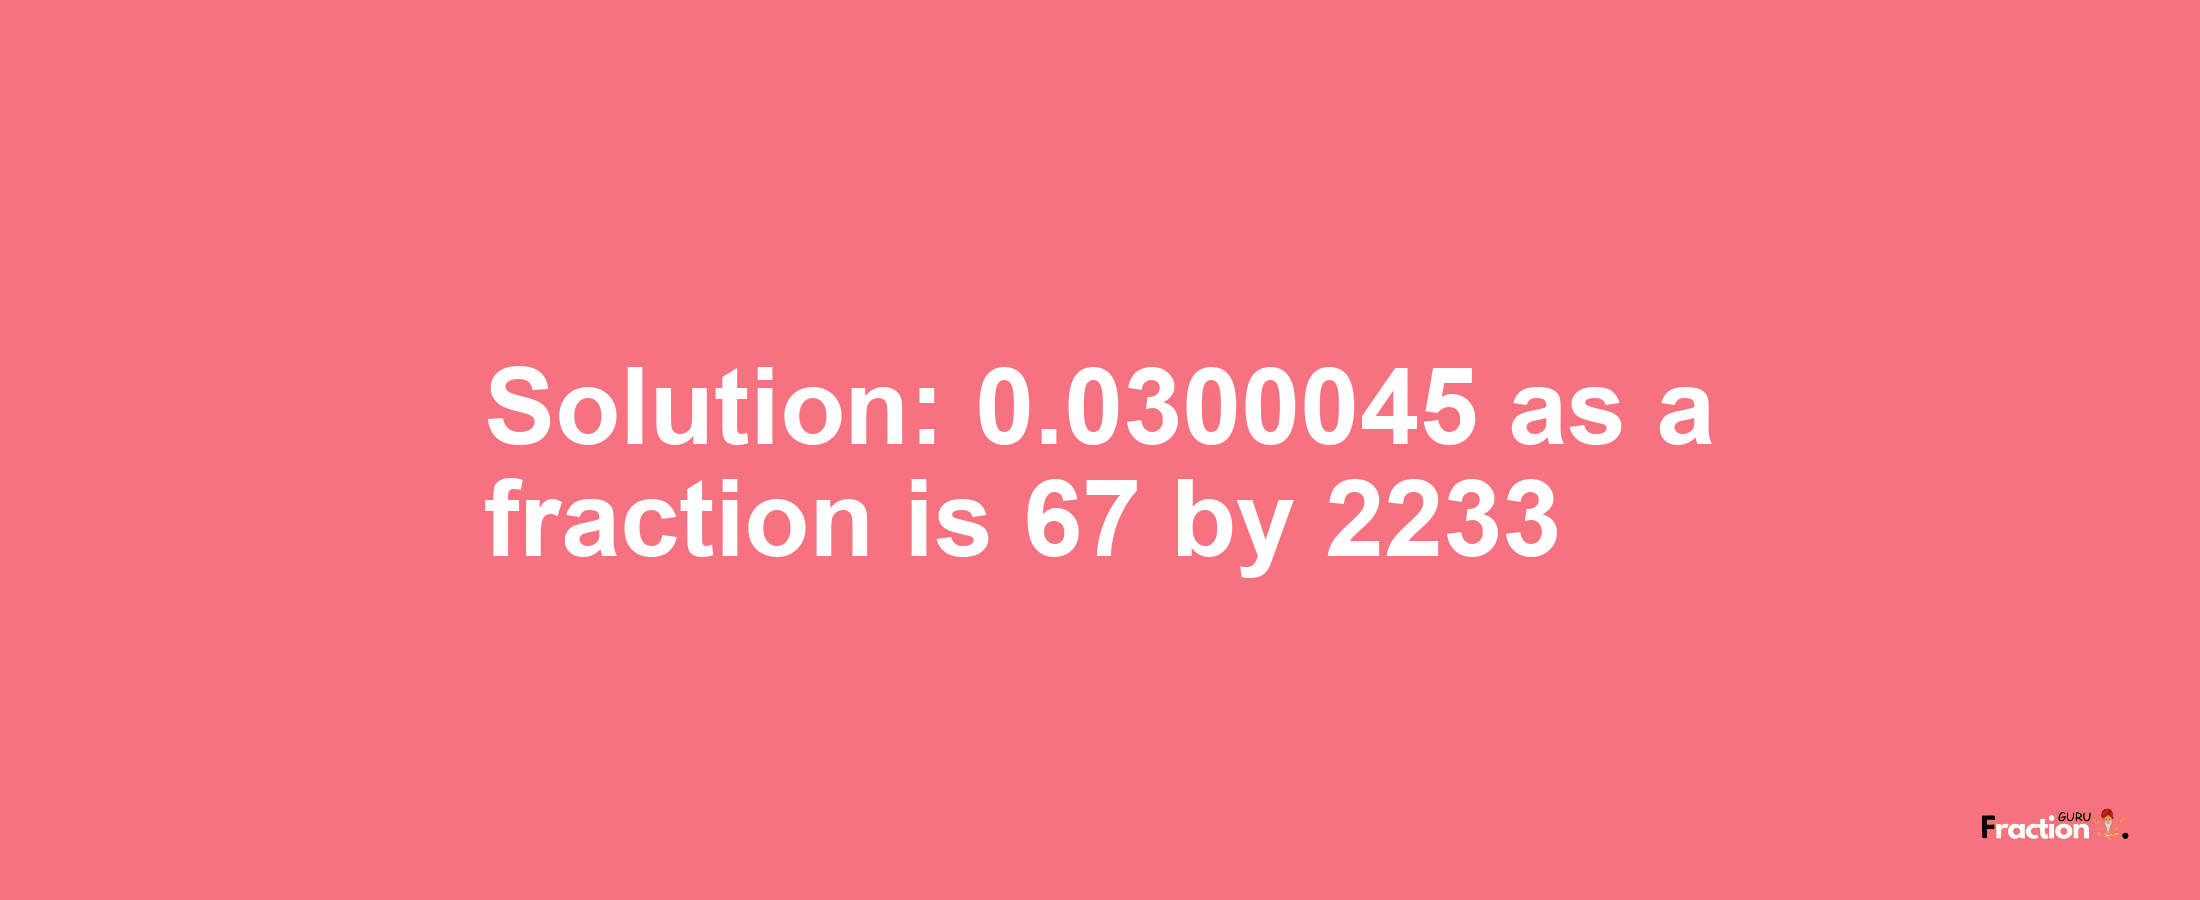 Solution:0.0300045 as a fraction is 67/2233